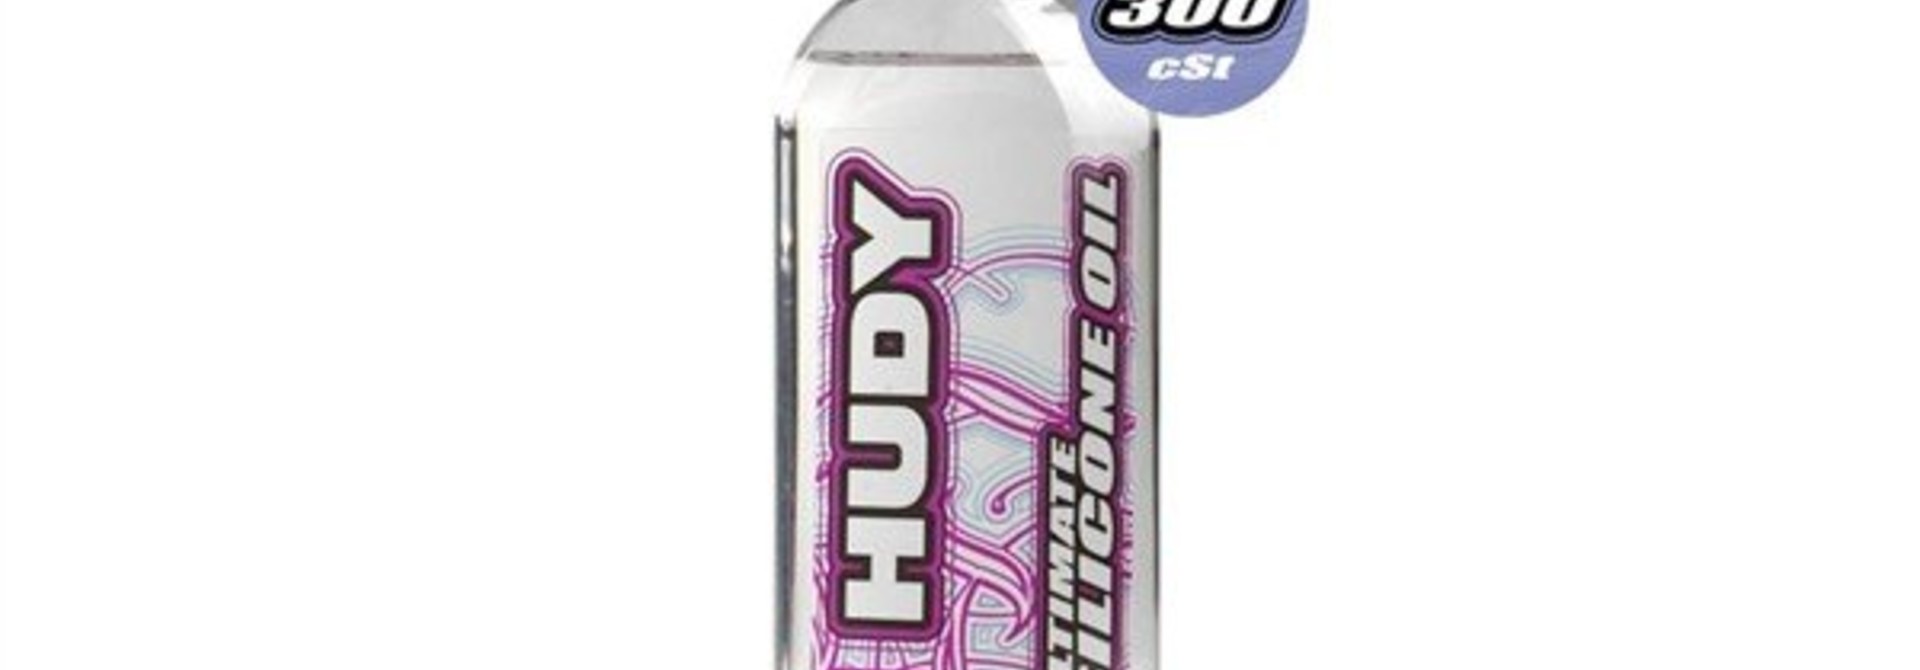 HUDY ULTIMATE SILICONE OIL 300 cSt - 100ML. H106331